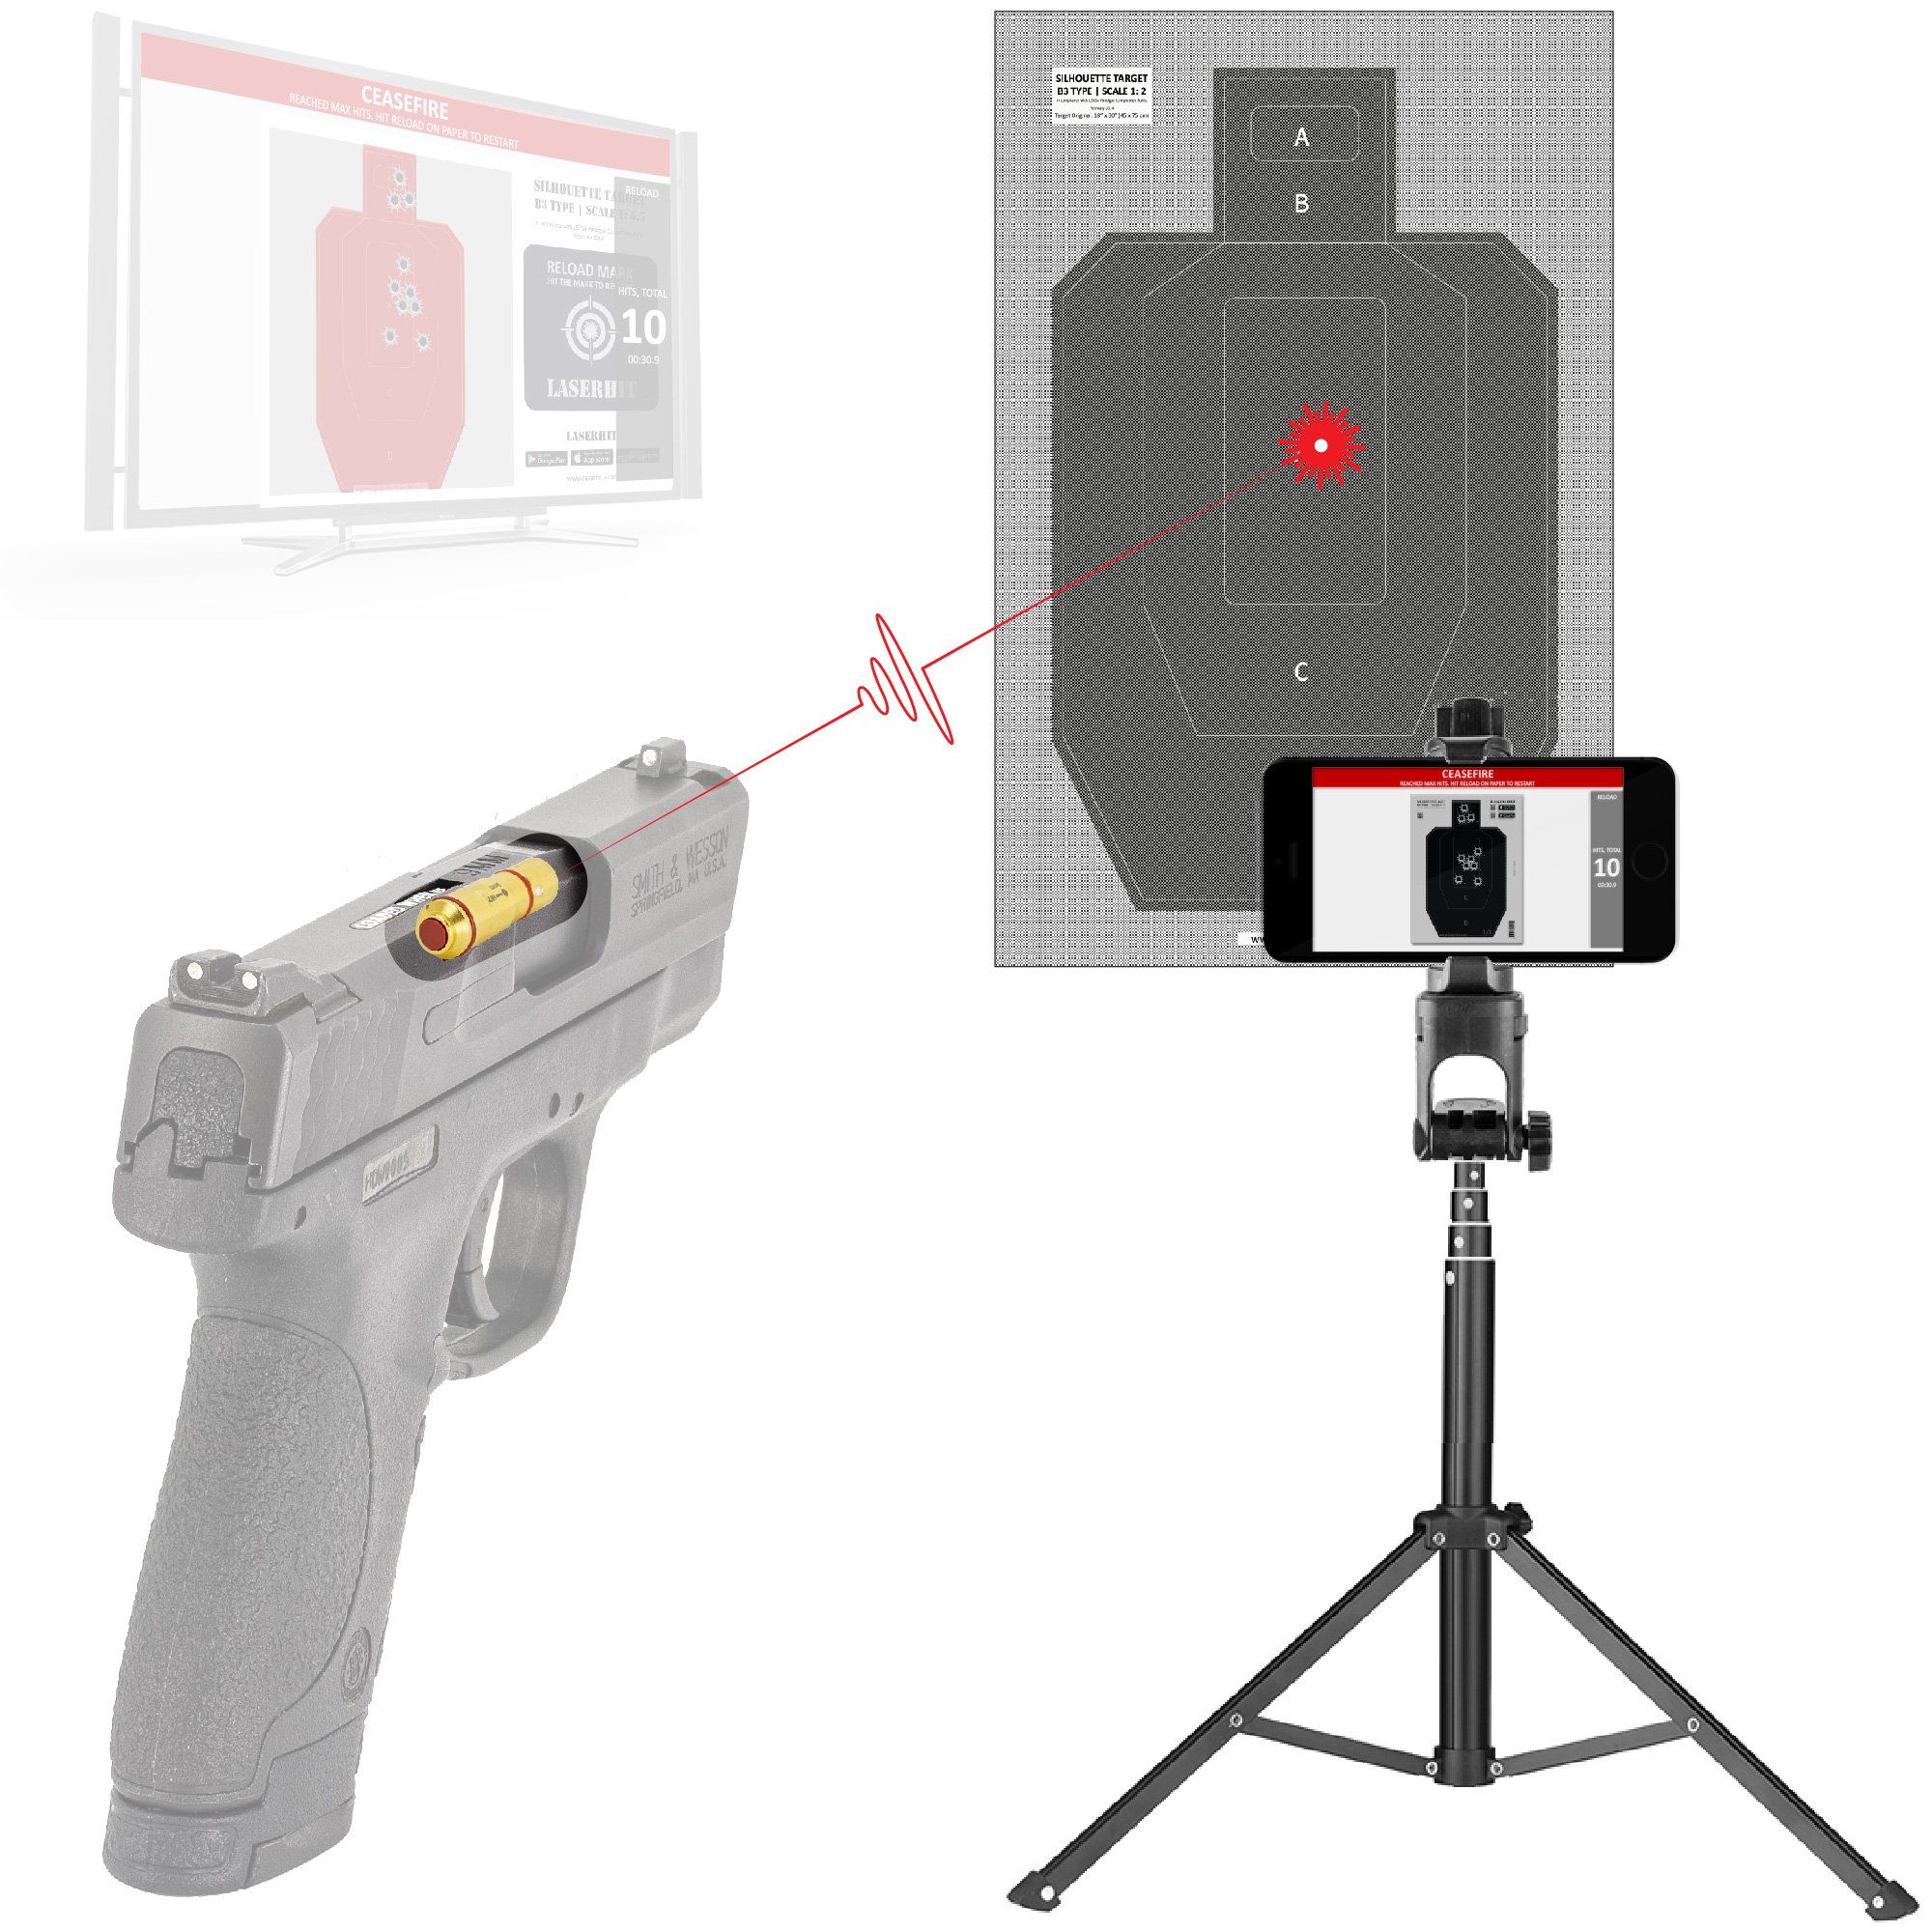 9mm &40 S&W Laser Training Bullets dry fire & one phone tri-pod 